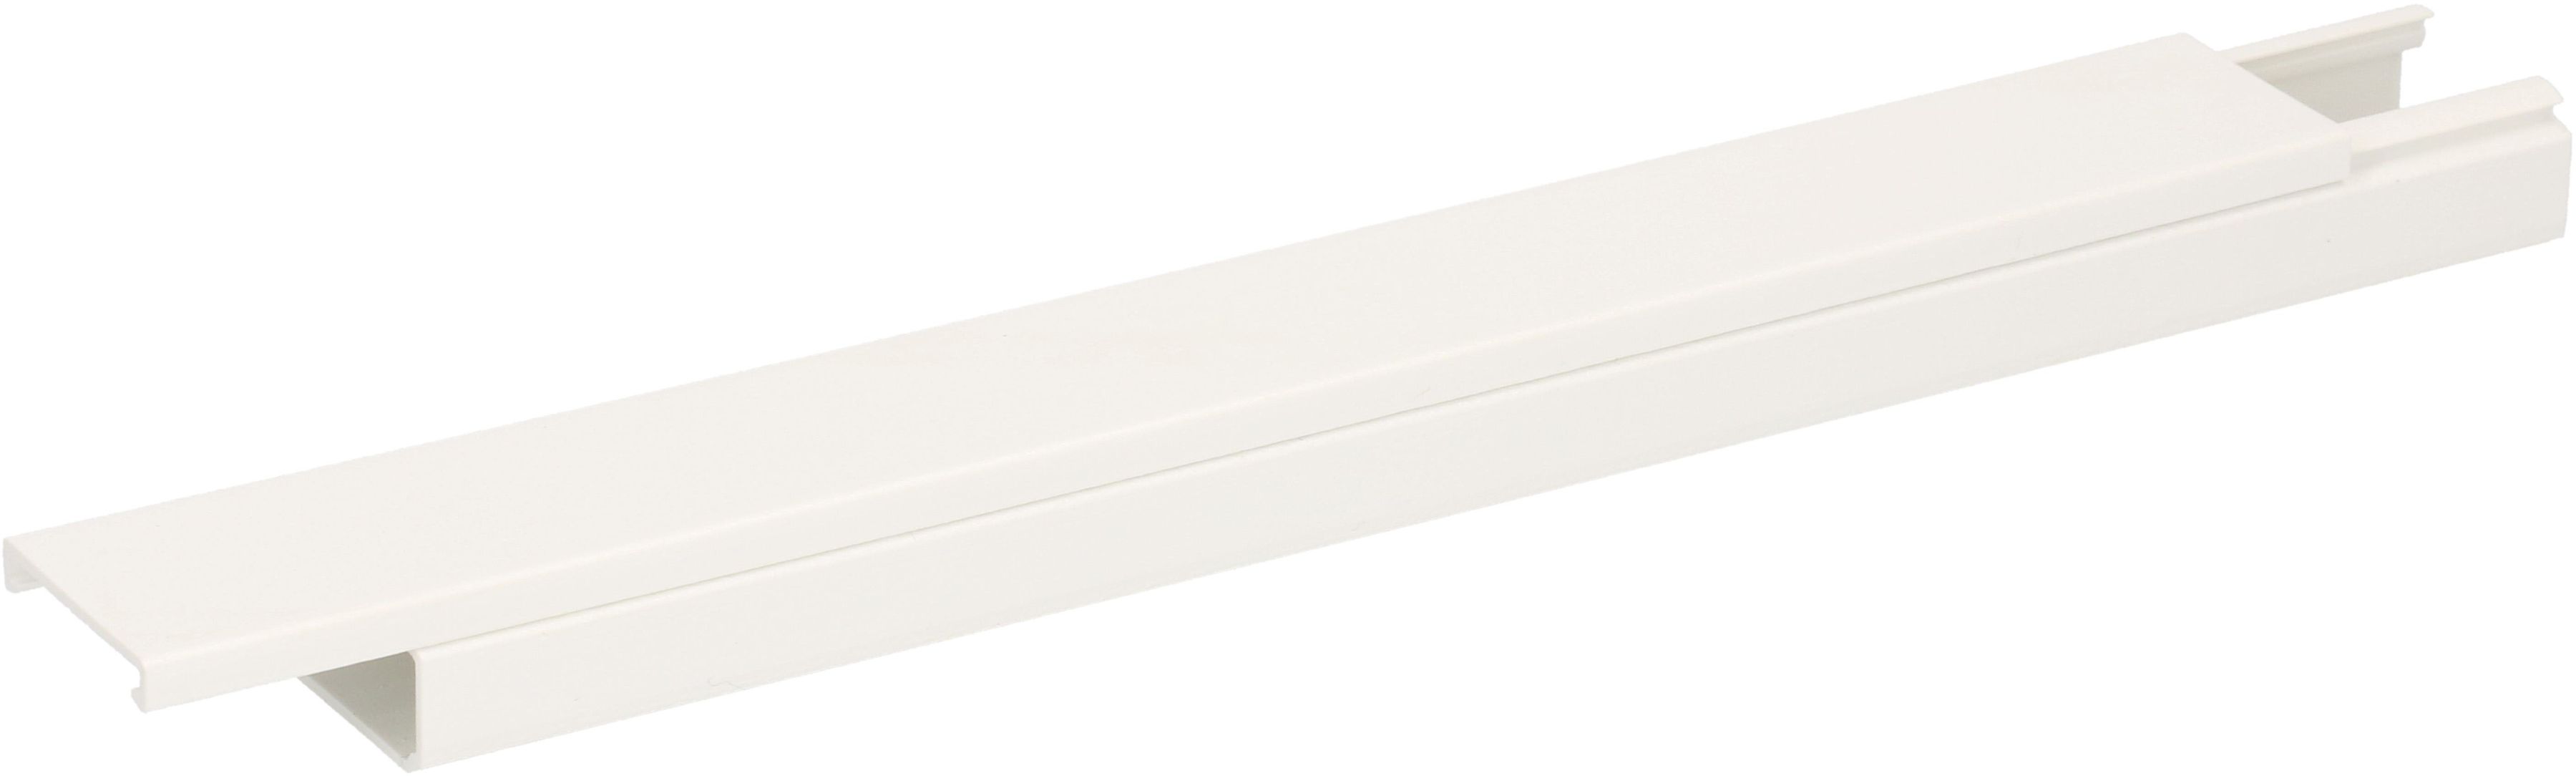 Cable duct white 25x16mm